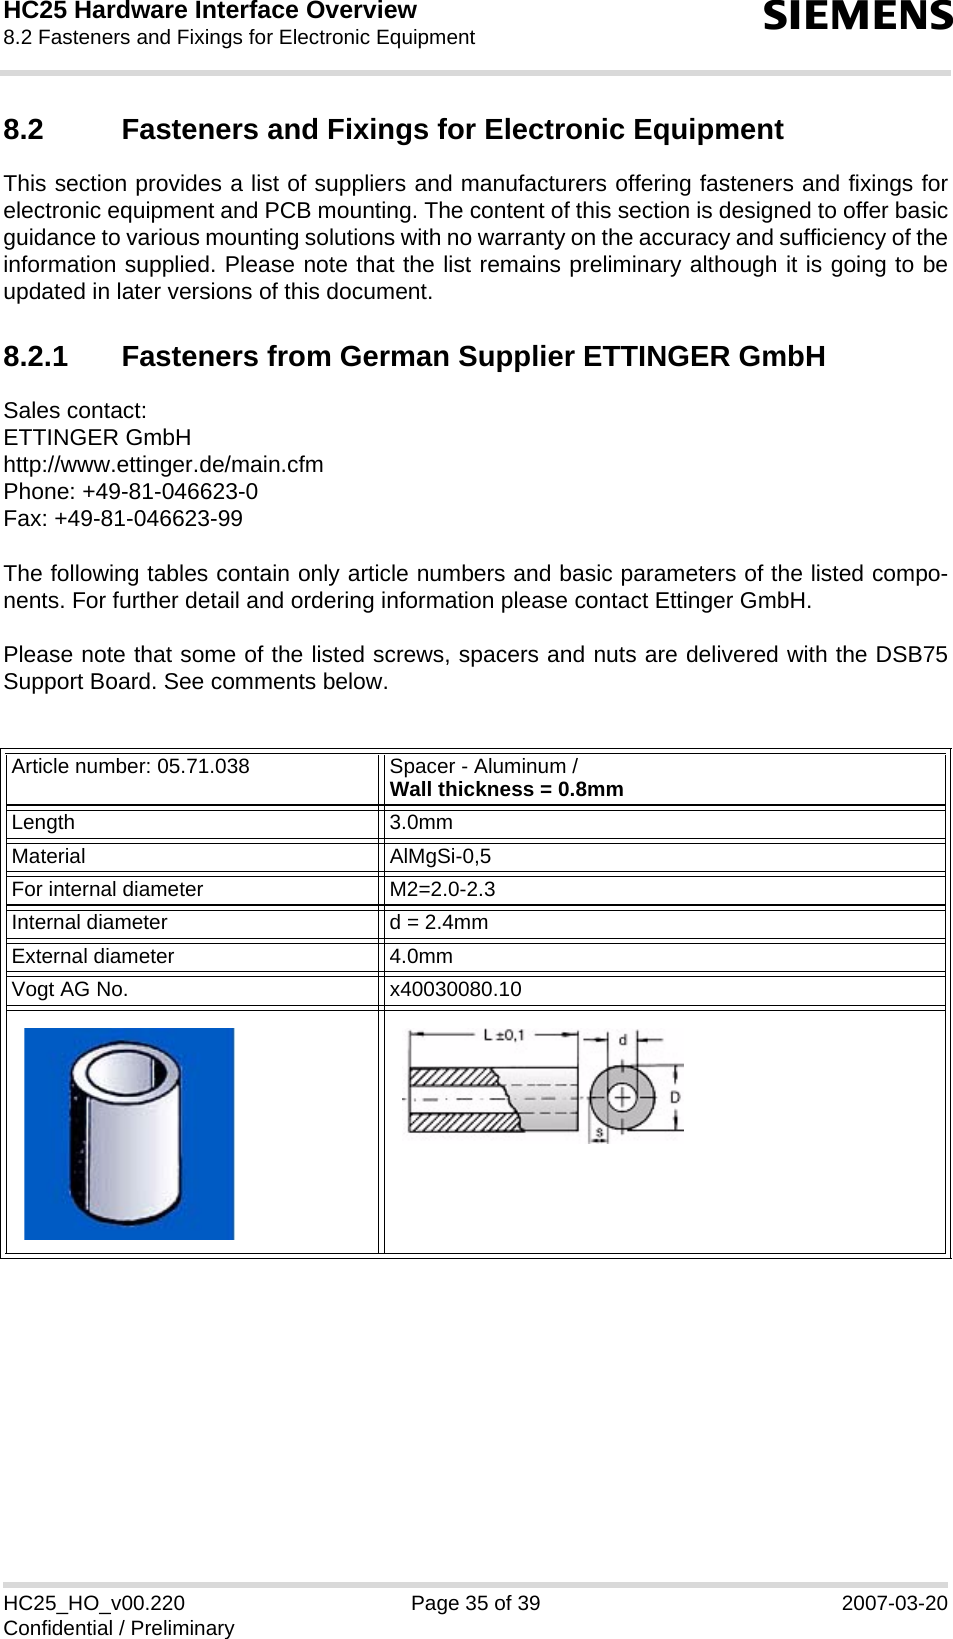 HC25 Hardware Interface Overview8.2 Fasteners and Fixings for Electronic Equipment39sHC25_HO_v00.220 Page 35 of 39 2007-03-20Confidential / Preliminary8.2 Fasteners and Fixings for Electronic EquipmentThis section provides a list of suppliers and manufacturers offering fasteners and fixings forelectronic equipment and PCB mounting. The content of this section is designed to offer basicguidance to various mounting solutions with no warranty on the accuracy and sufficiency of theinformation supplied. Please note that the list remains preliminary although it is going to beupdated in later versions of this document.8.2.1 Fasteners from German Supplier ETTINGER GmbHSales contact:ETTINGER GmbHhttp://www.ettinger.de/main.cfmPhone: +49-81-046623-0Fax: +49-81-046623-99The following tables contain only article numbers and basic parameters of the listed compo-nents. For further detail and ordering information please contact Ettinger GmbH. Please note that some of the listed screws, spacers and nuts are delivered with the DSB75Support Board. See comments below.Article number: 05.71.038 Spacer - Aluminum /Wall thickness = 0.8mmLength 3.0mmMaterial AlMgSi-0,5For internal diameter M2=2.0-2.3 Internal diameter d = 2.4mmExternal diameter 4.0mmVogt AG No. x40030080.10